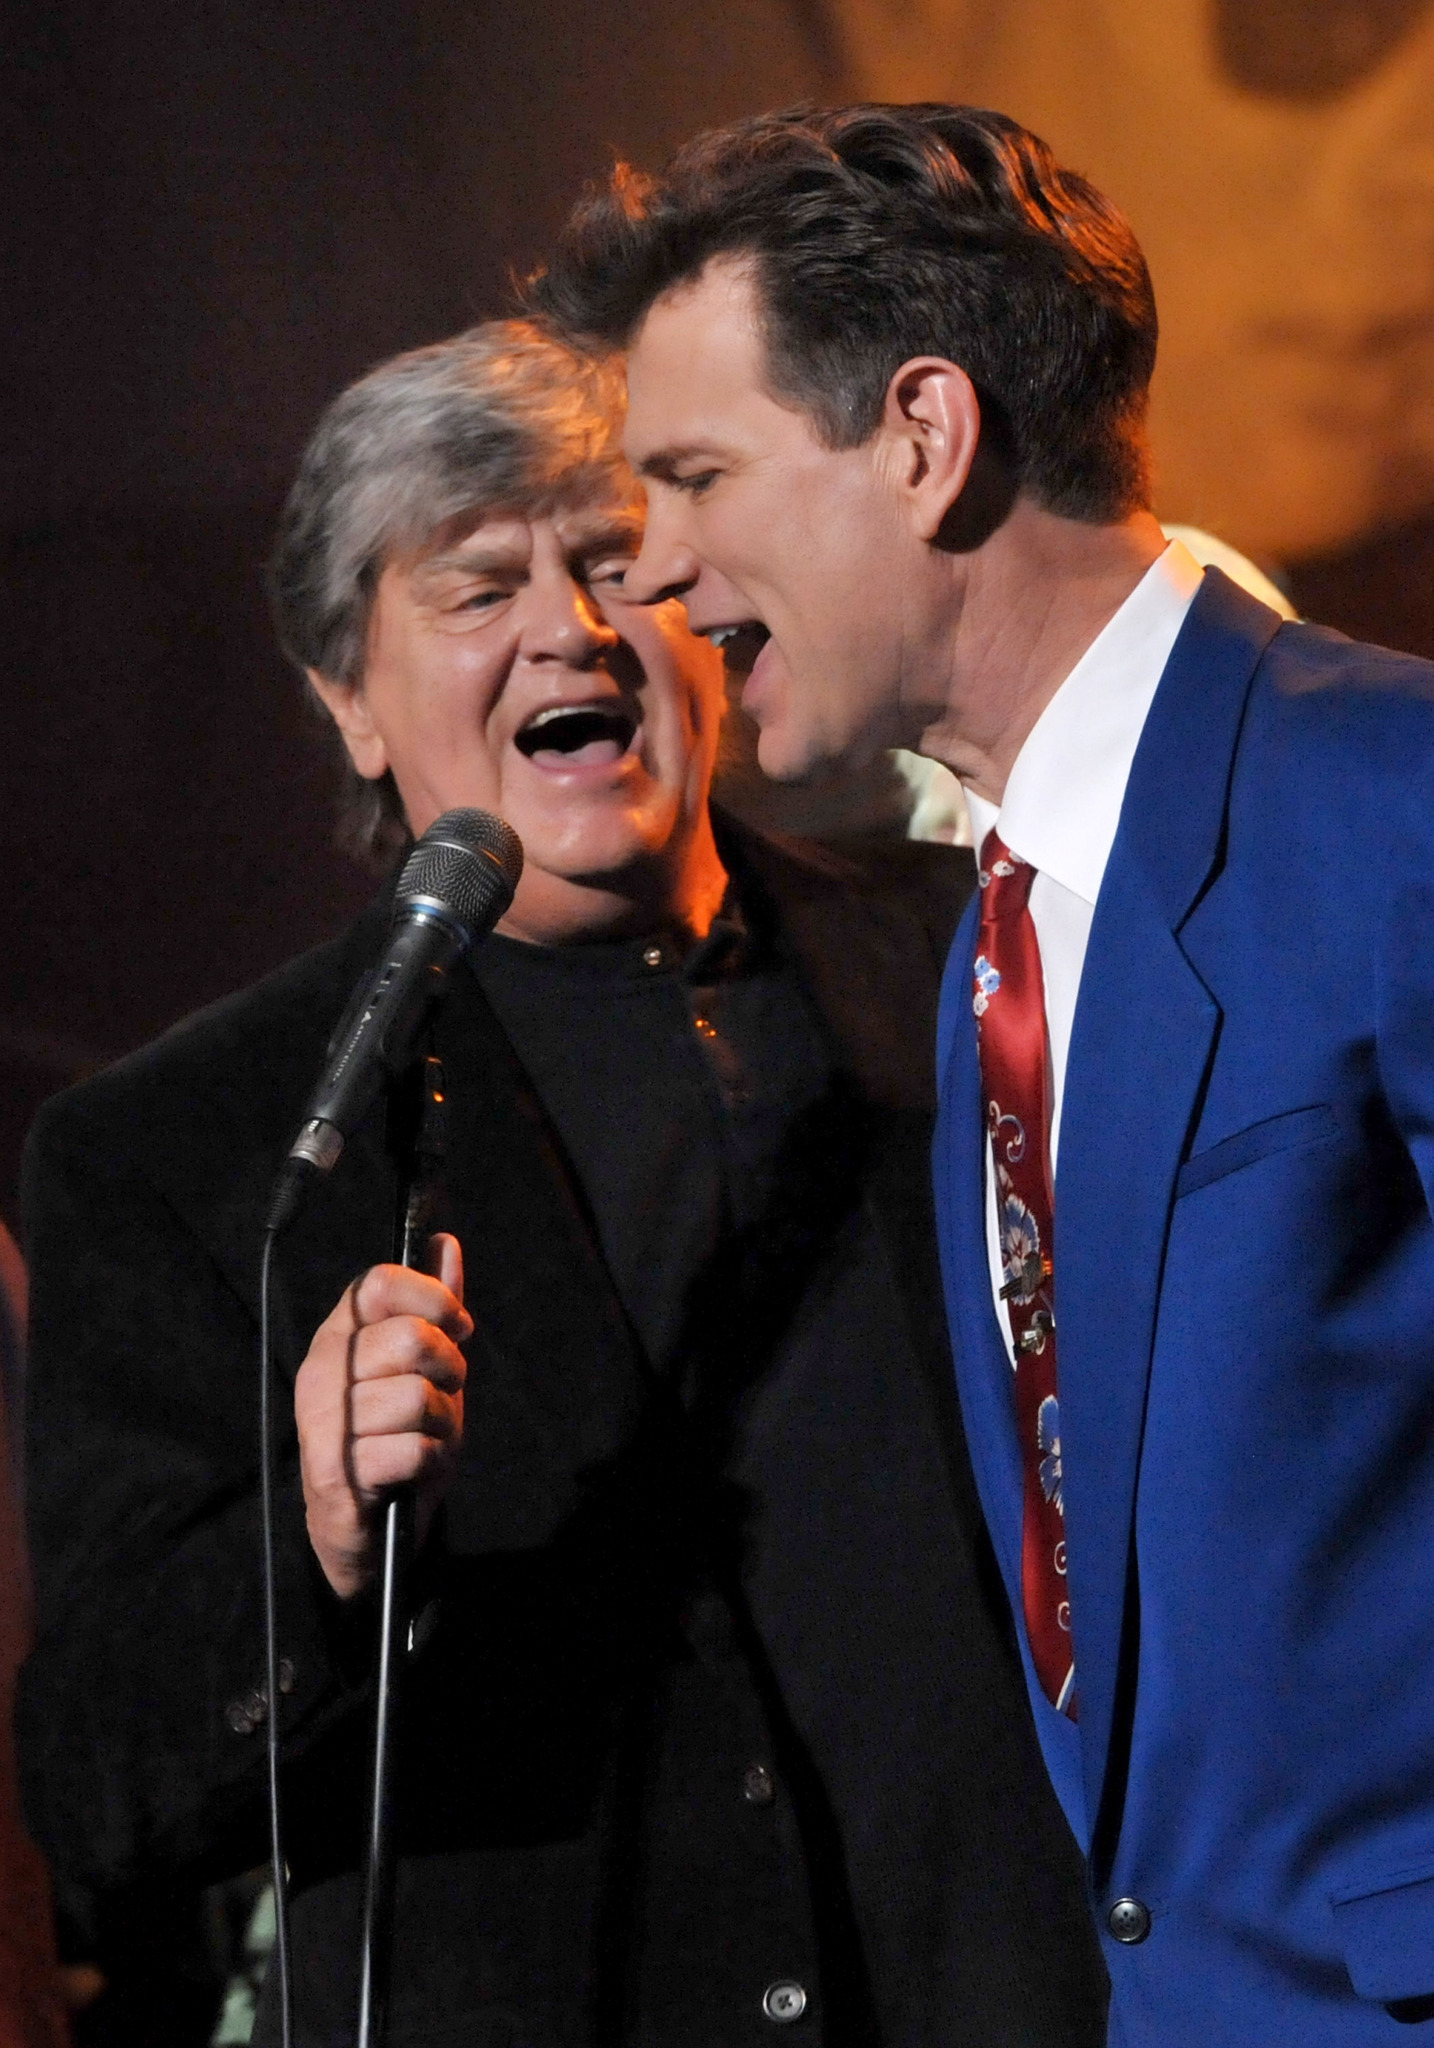 Chris Isaak and Phil Everly